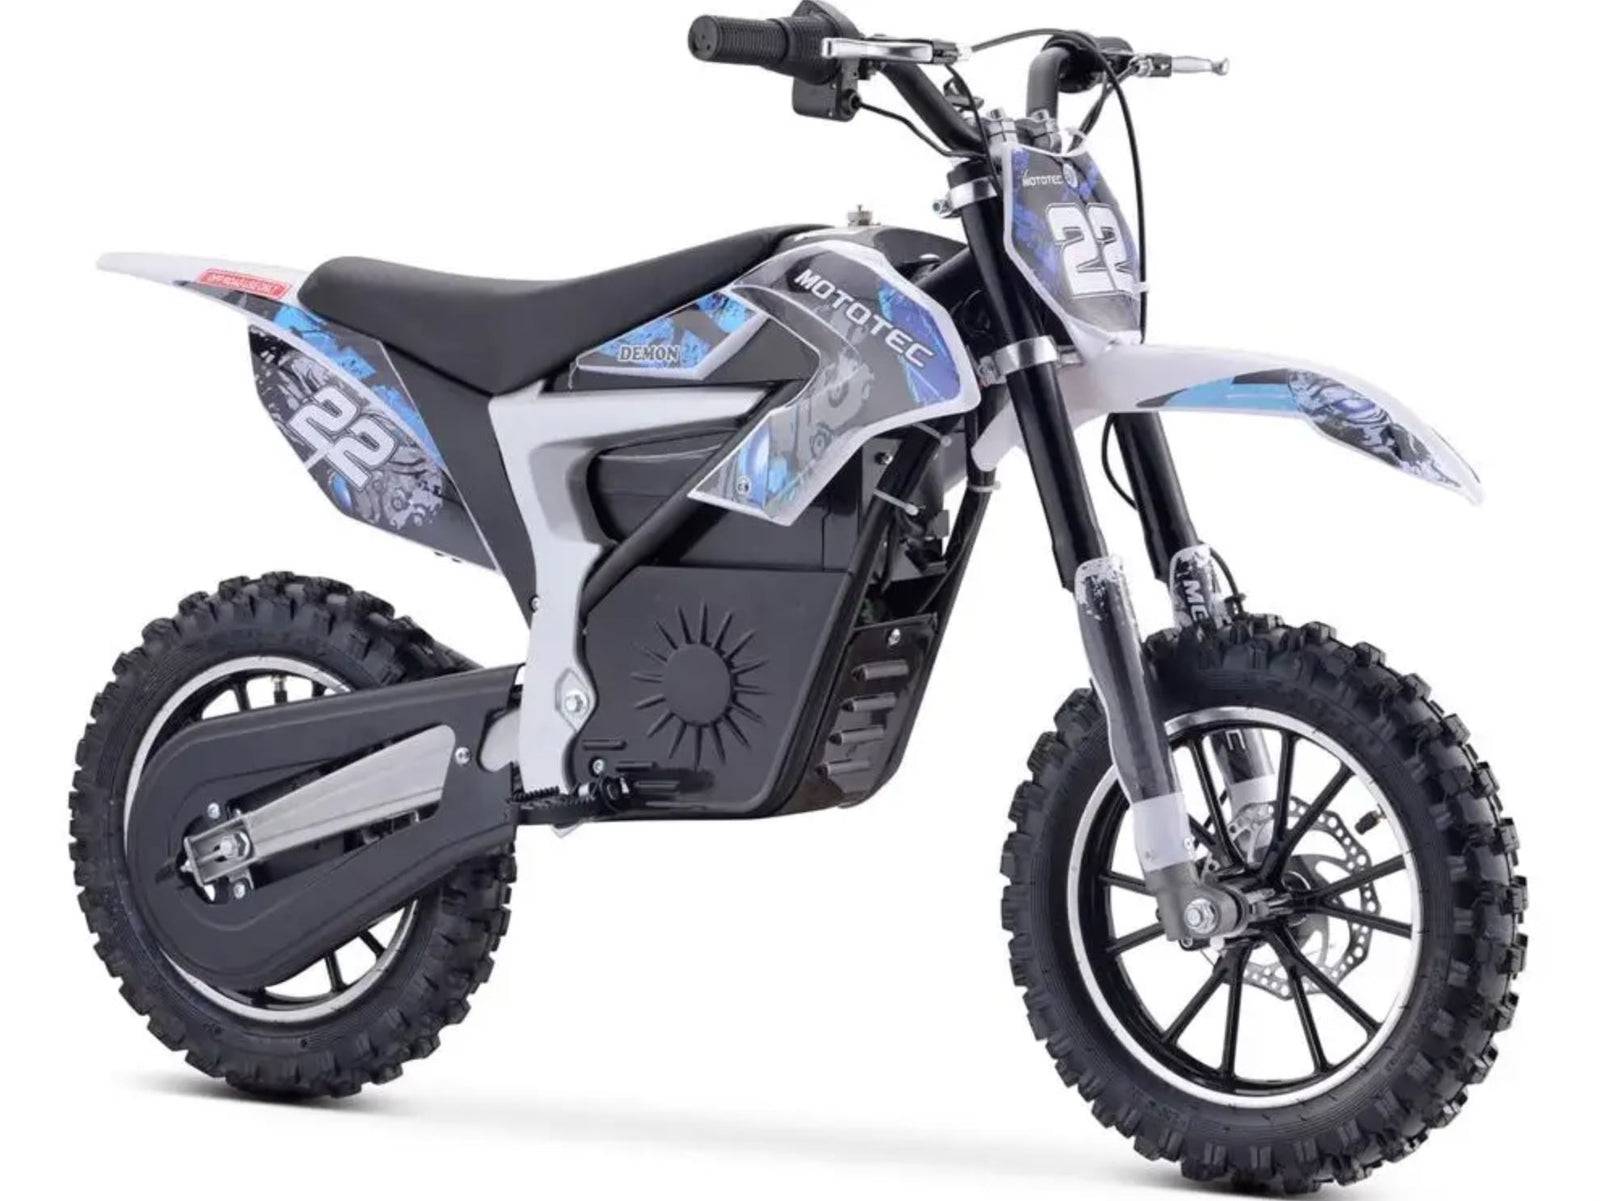 Electric Dirt Bikes for Kids: Safety and Fun for Young Riders